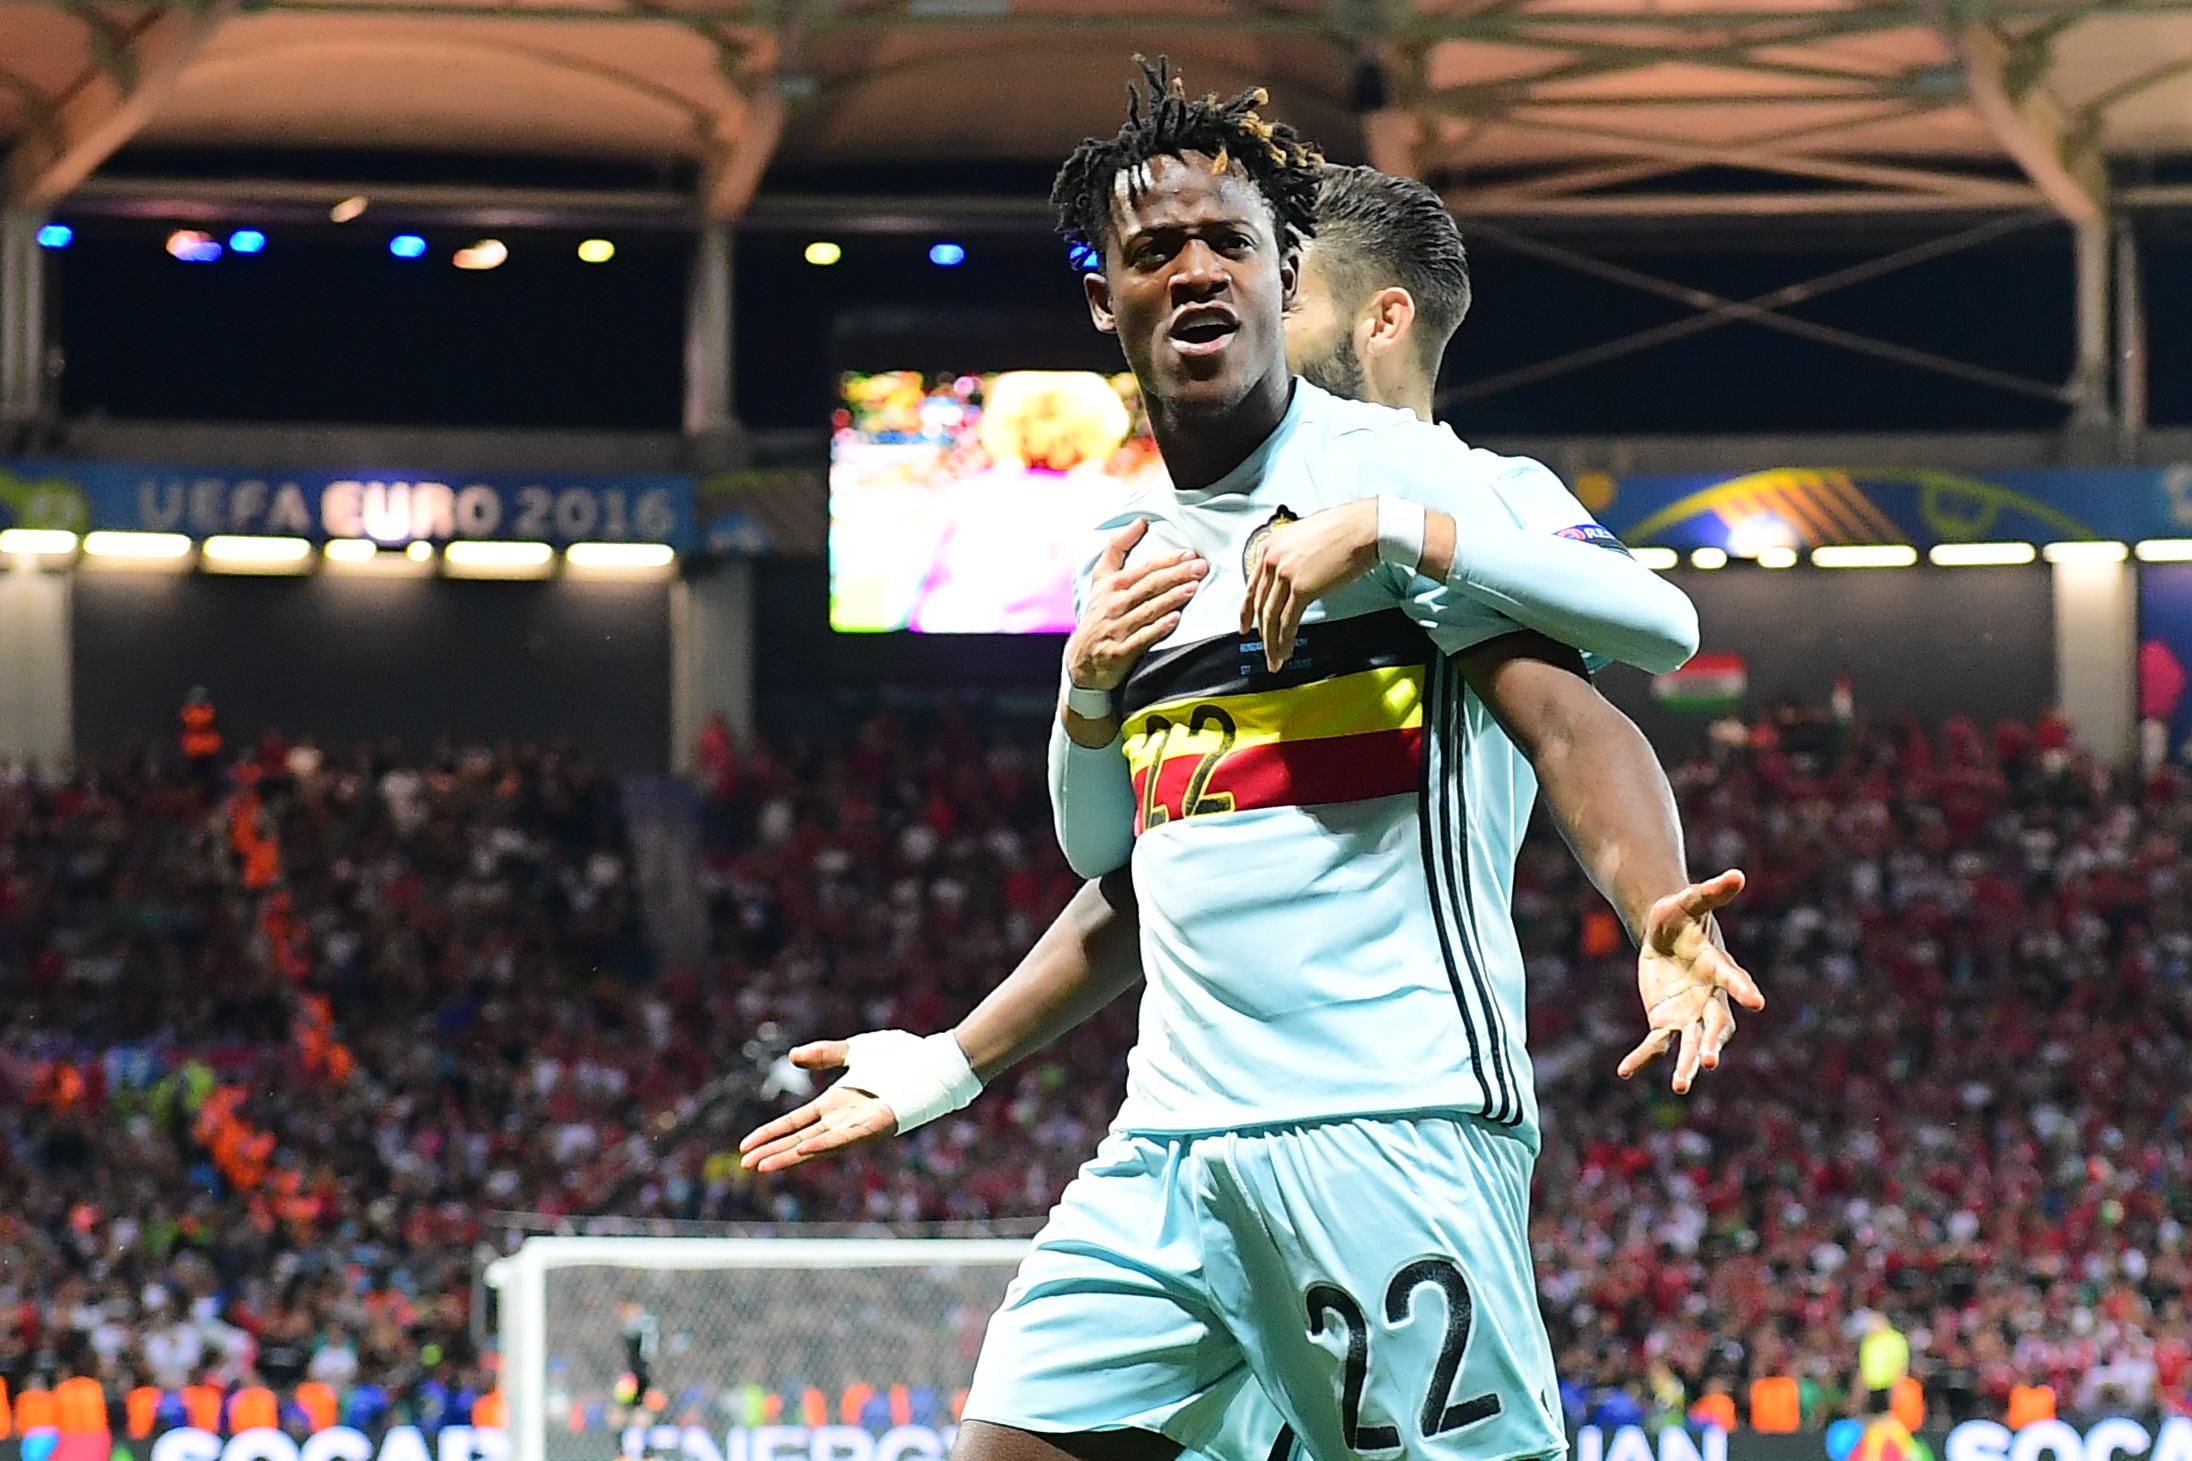 Belgium's forward Michy Batshuayi (L) celebrates after scoring his team's second goal  during the Euro 2016 round of 16 football match between Hungary and Belgium at the Stadium Municipal in Toulouse on June 26, 2016.   / AFP / EMMANUEL DUNAND        (Photo credit should read EMMANUEL DUNAND/AFP/Getty Images)